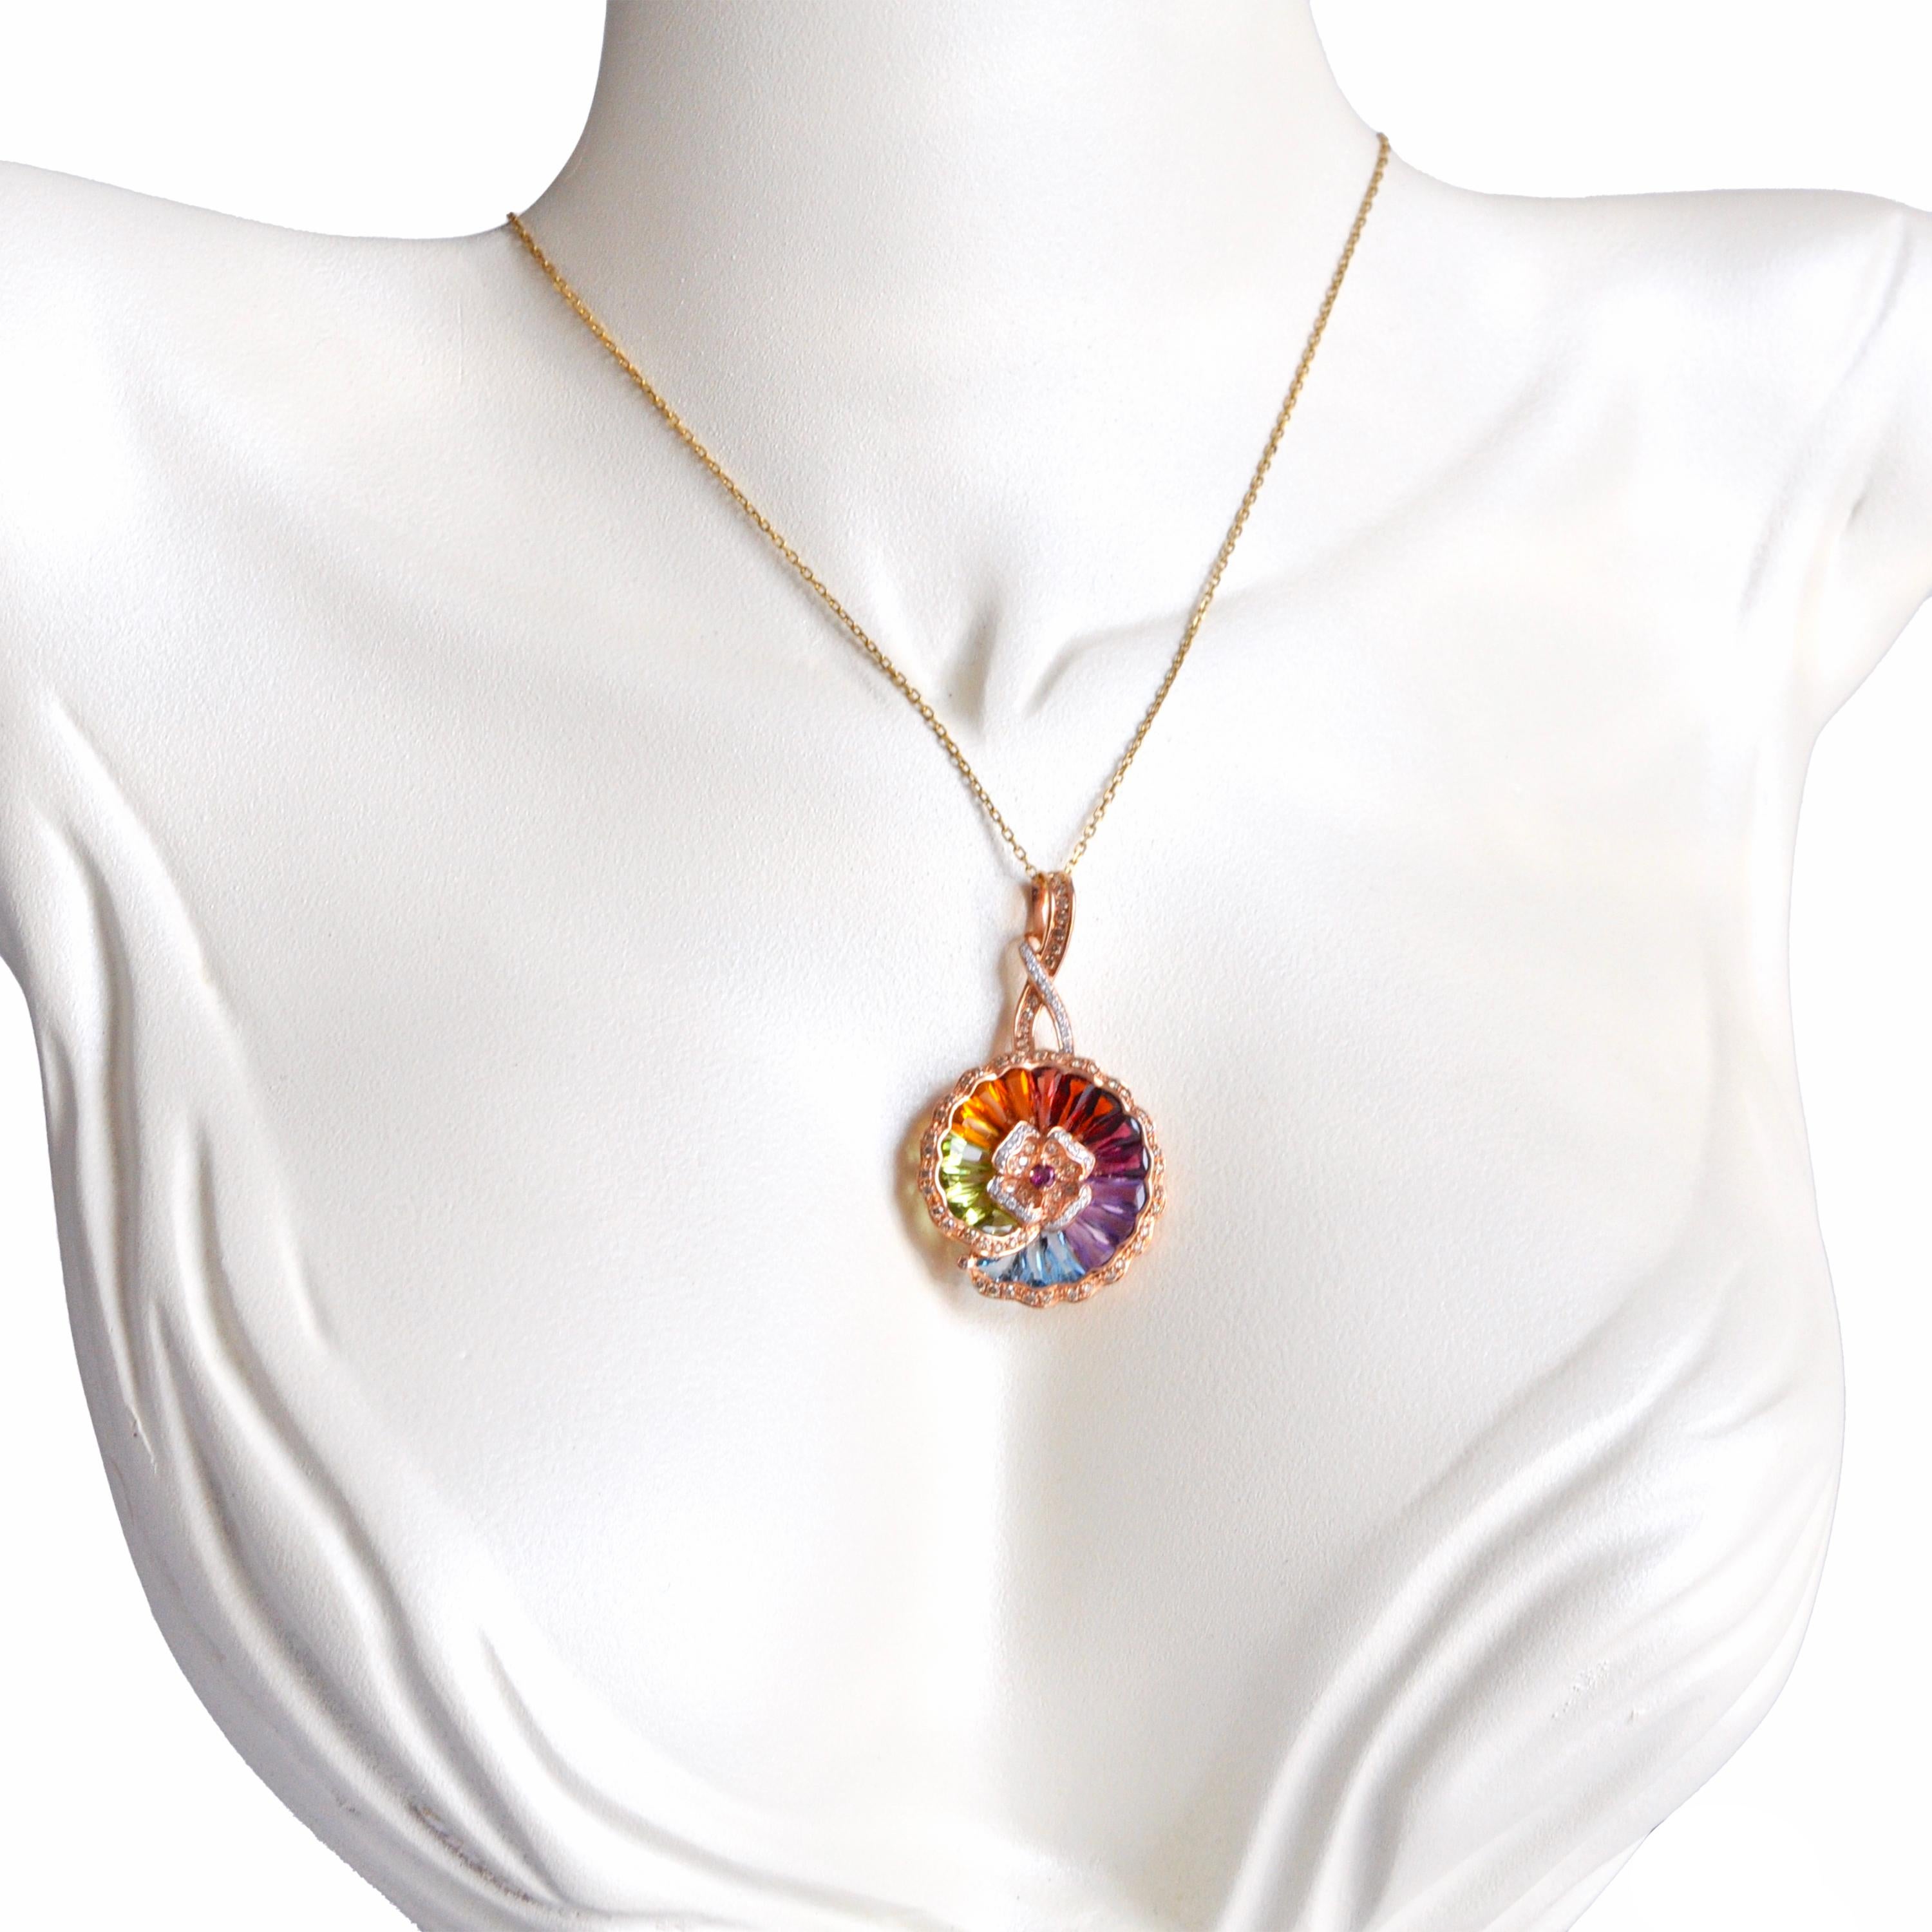 14 karat rose gold rainbow multicolour circular drop pendant necklace

This rainbow gemstones round pendant is a kaleidoscope of color and brilliance that captures the essence of beauty. Crafted in enchanting rose gold, this pendant features a